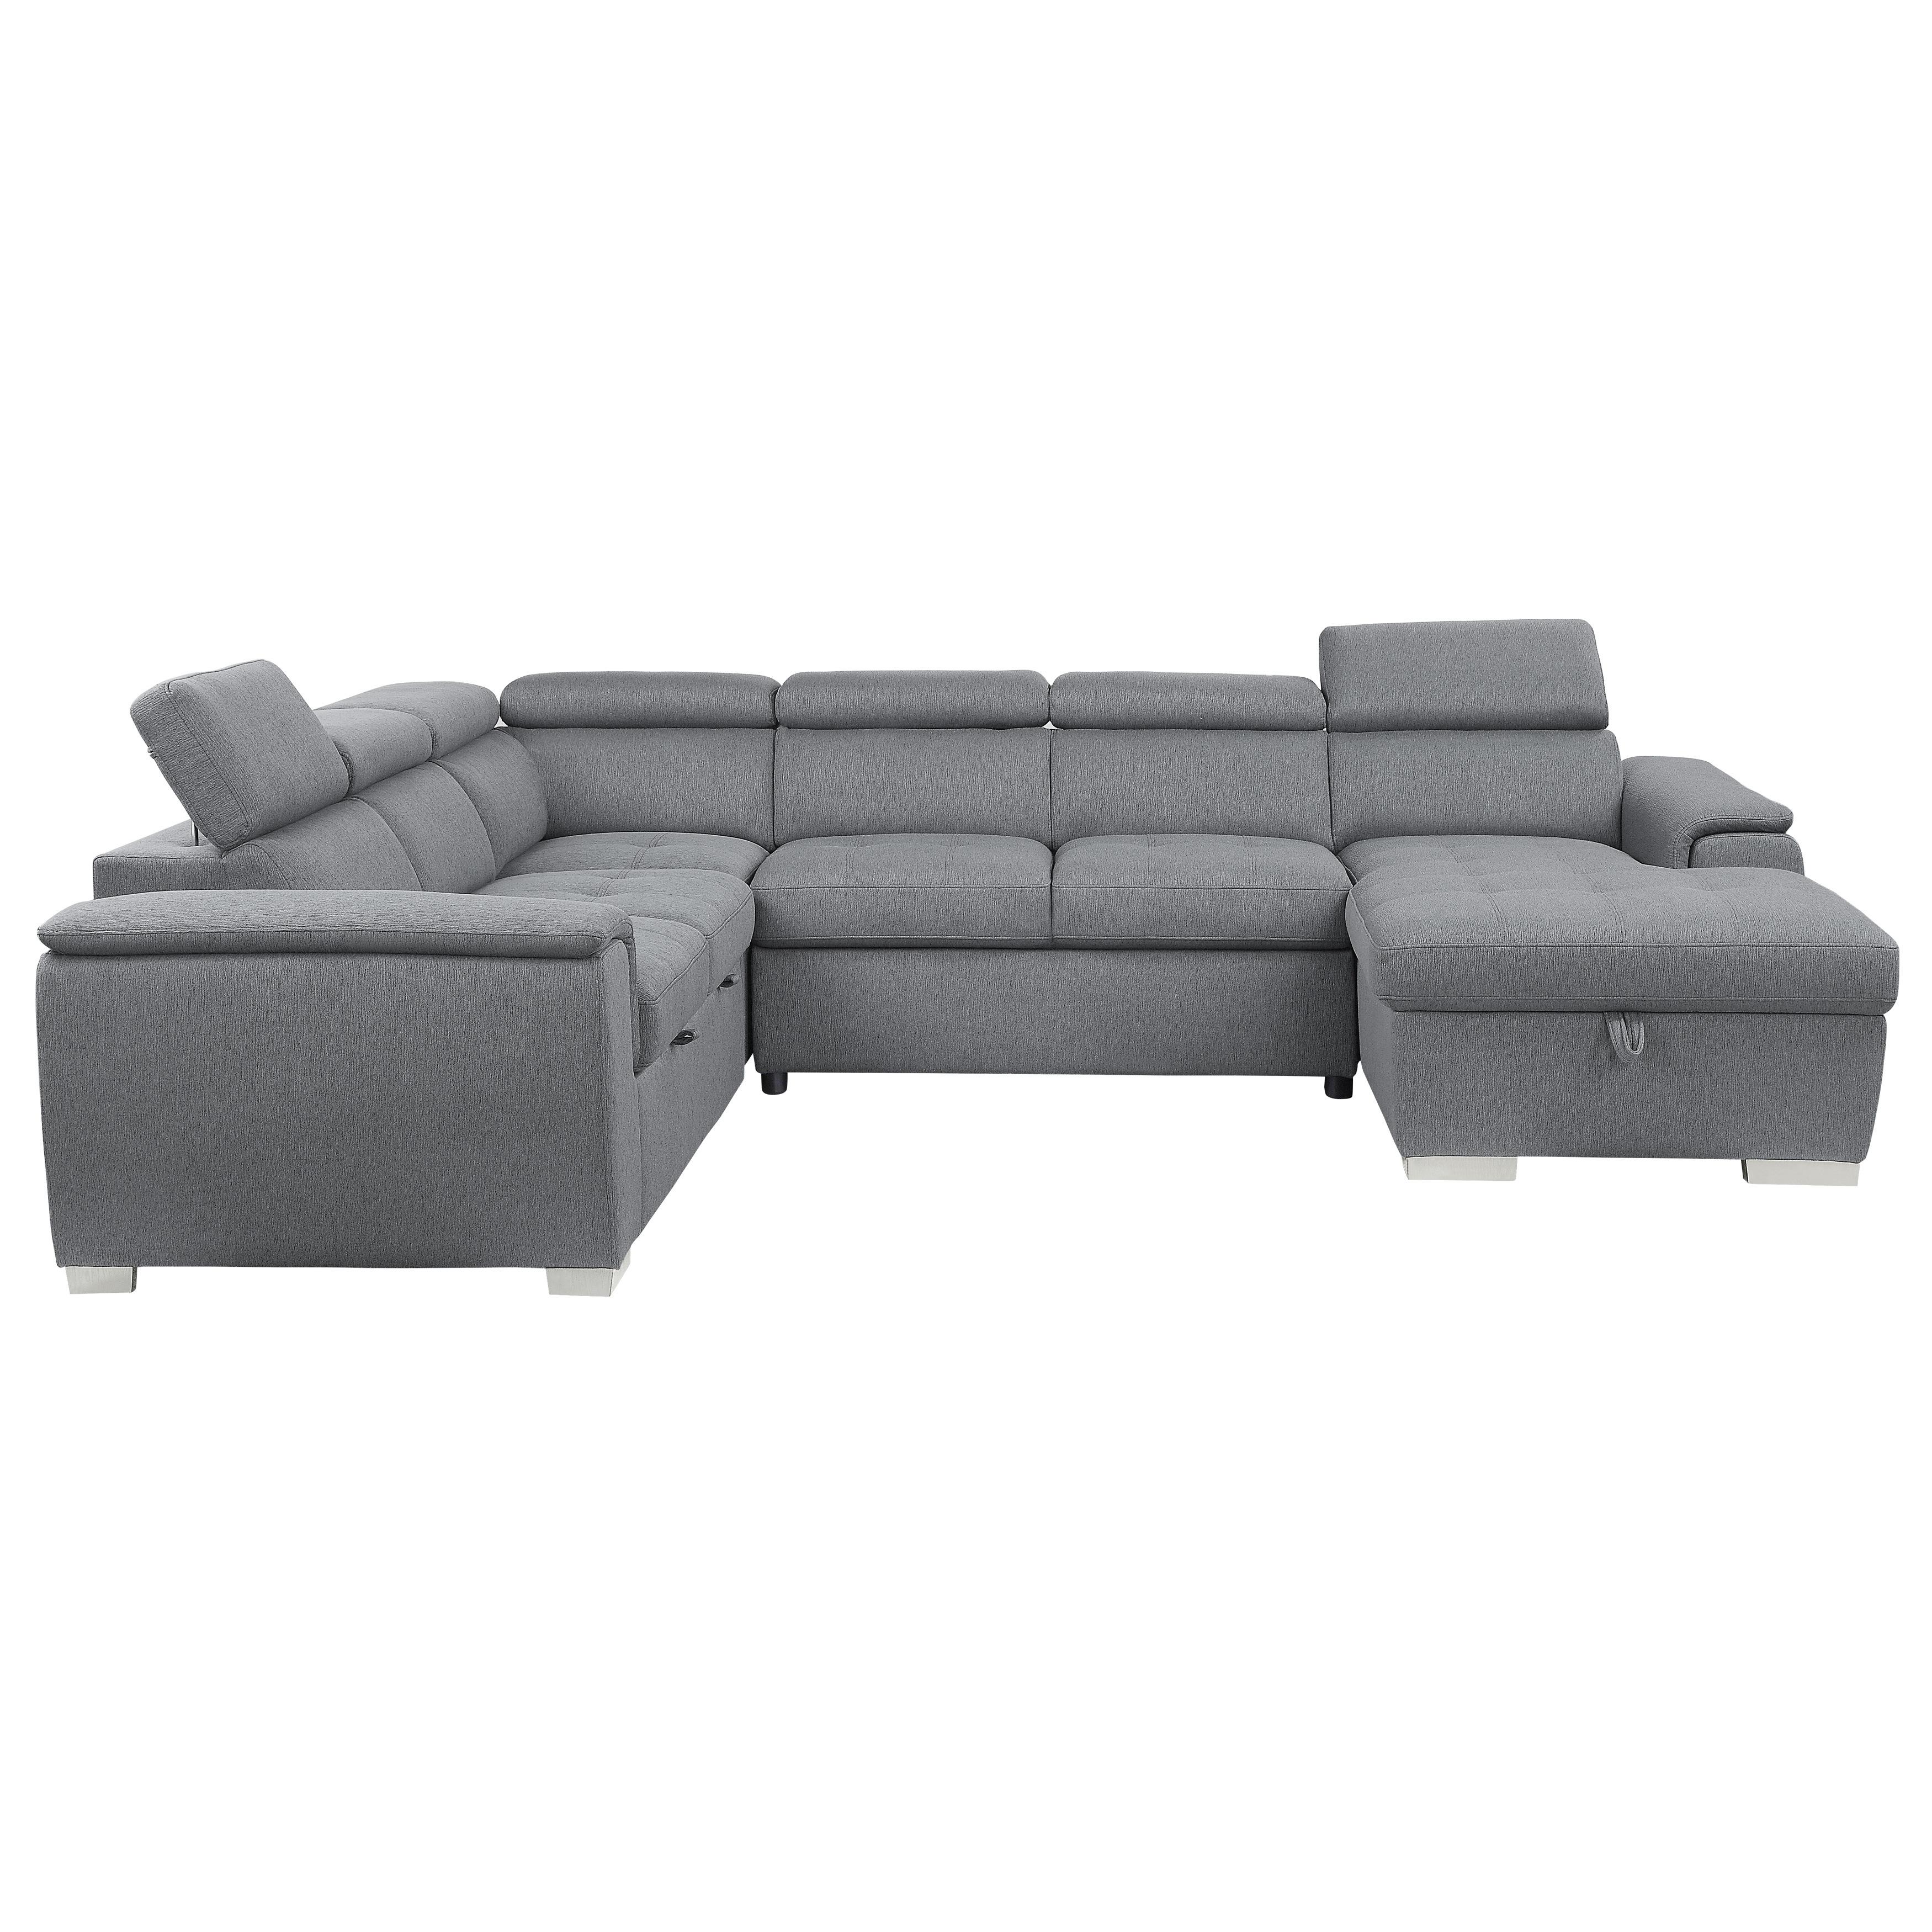 Contemporary Sectional 9355GY*42LRC Berel 9355GY*42LRC in Gray Chenille